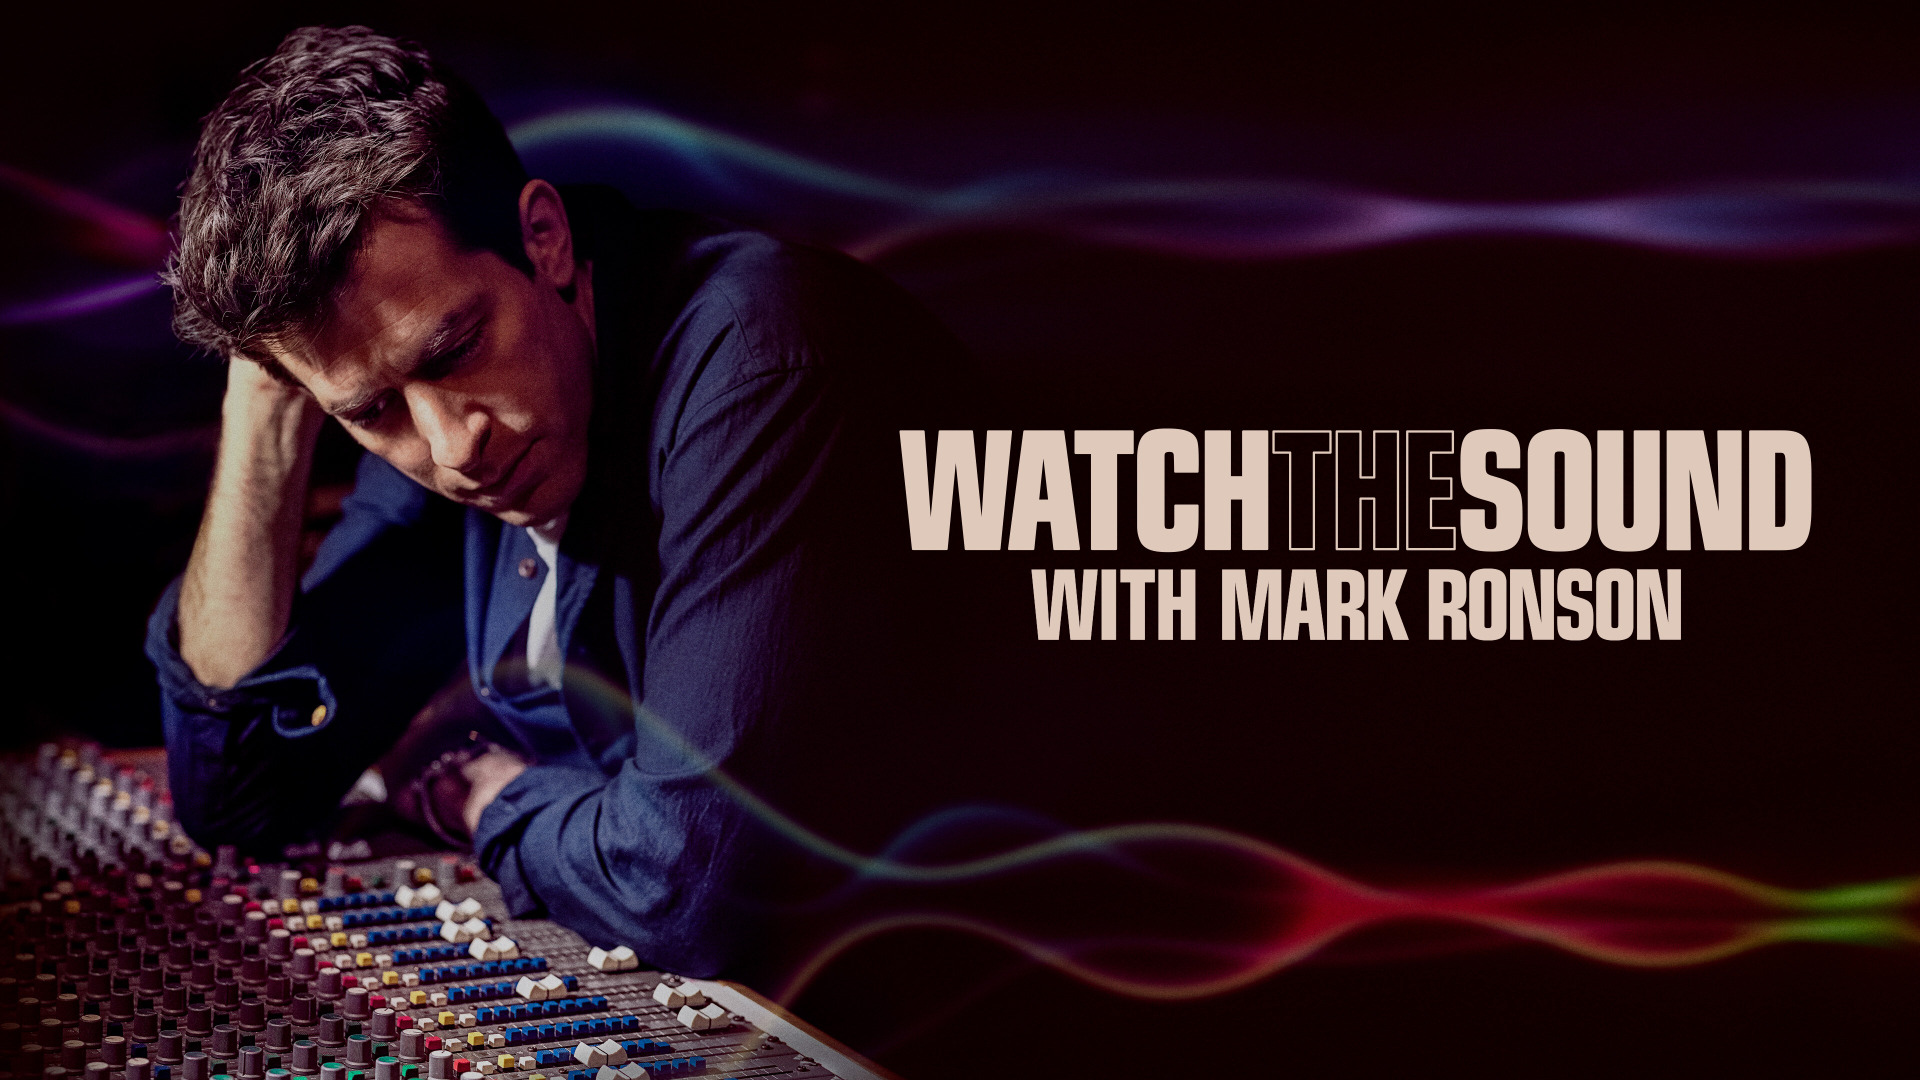 Show Watch the Sound with Mark Ronson